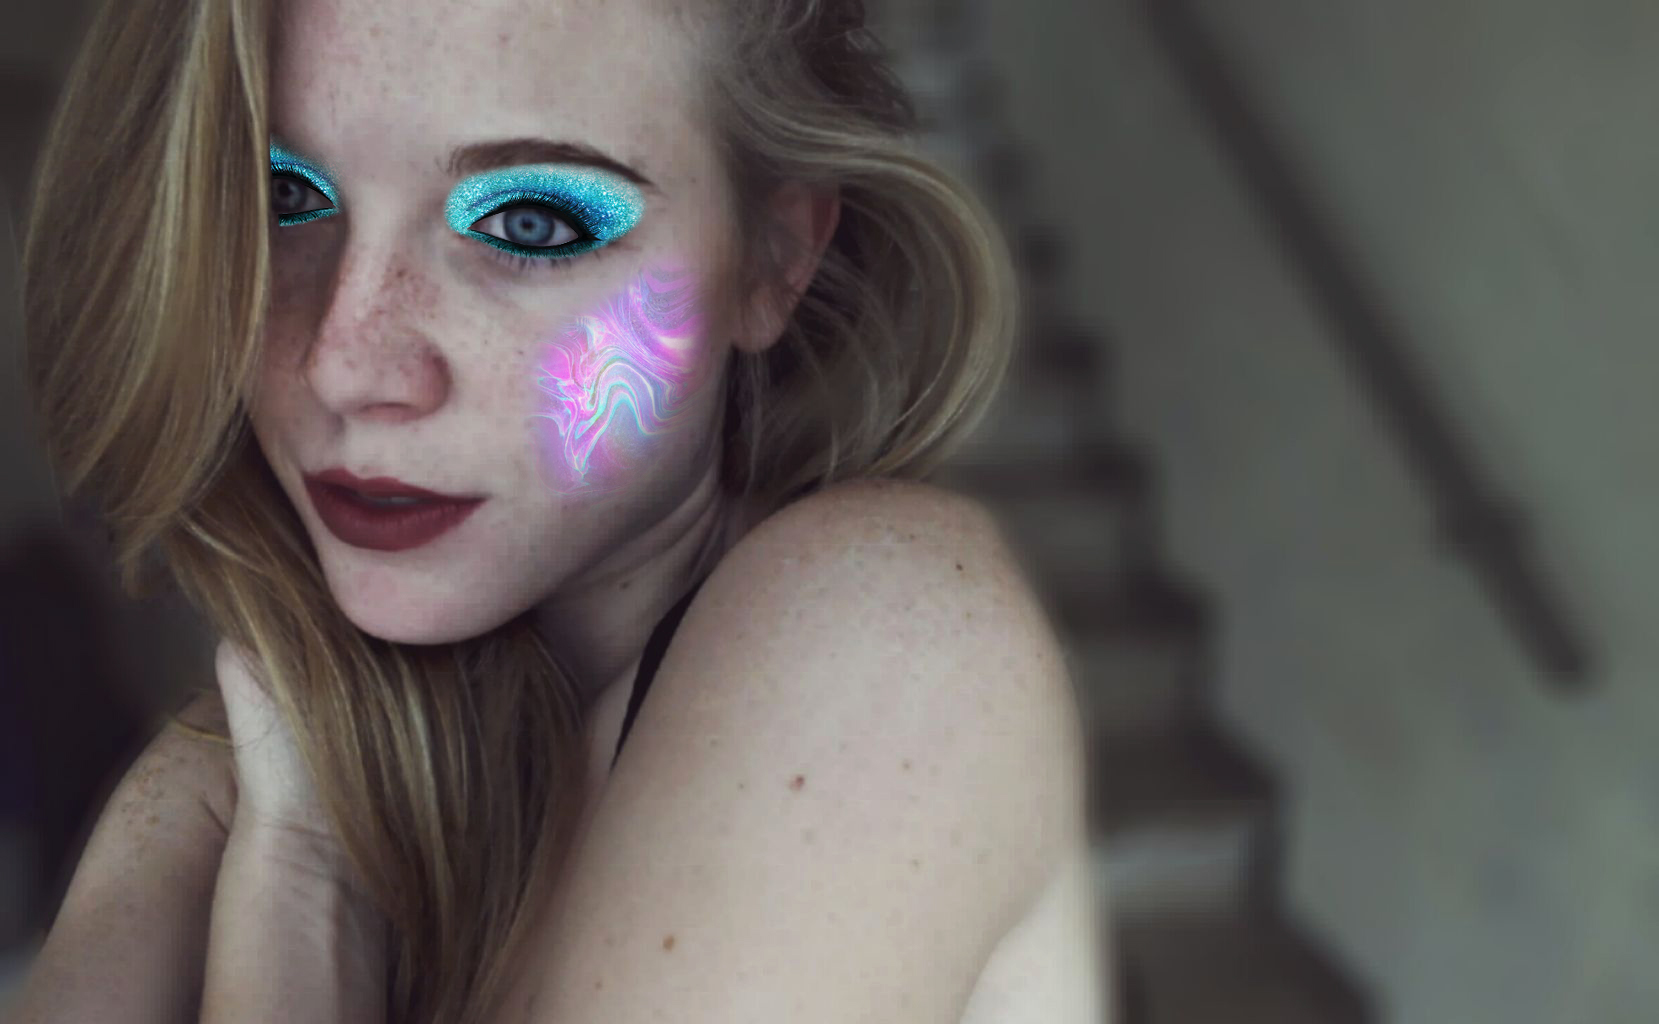 Put on Holographic Makeup with the PicsArt Photo Editor